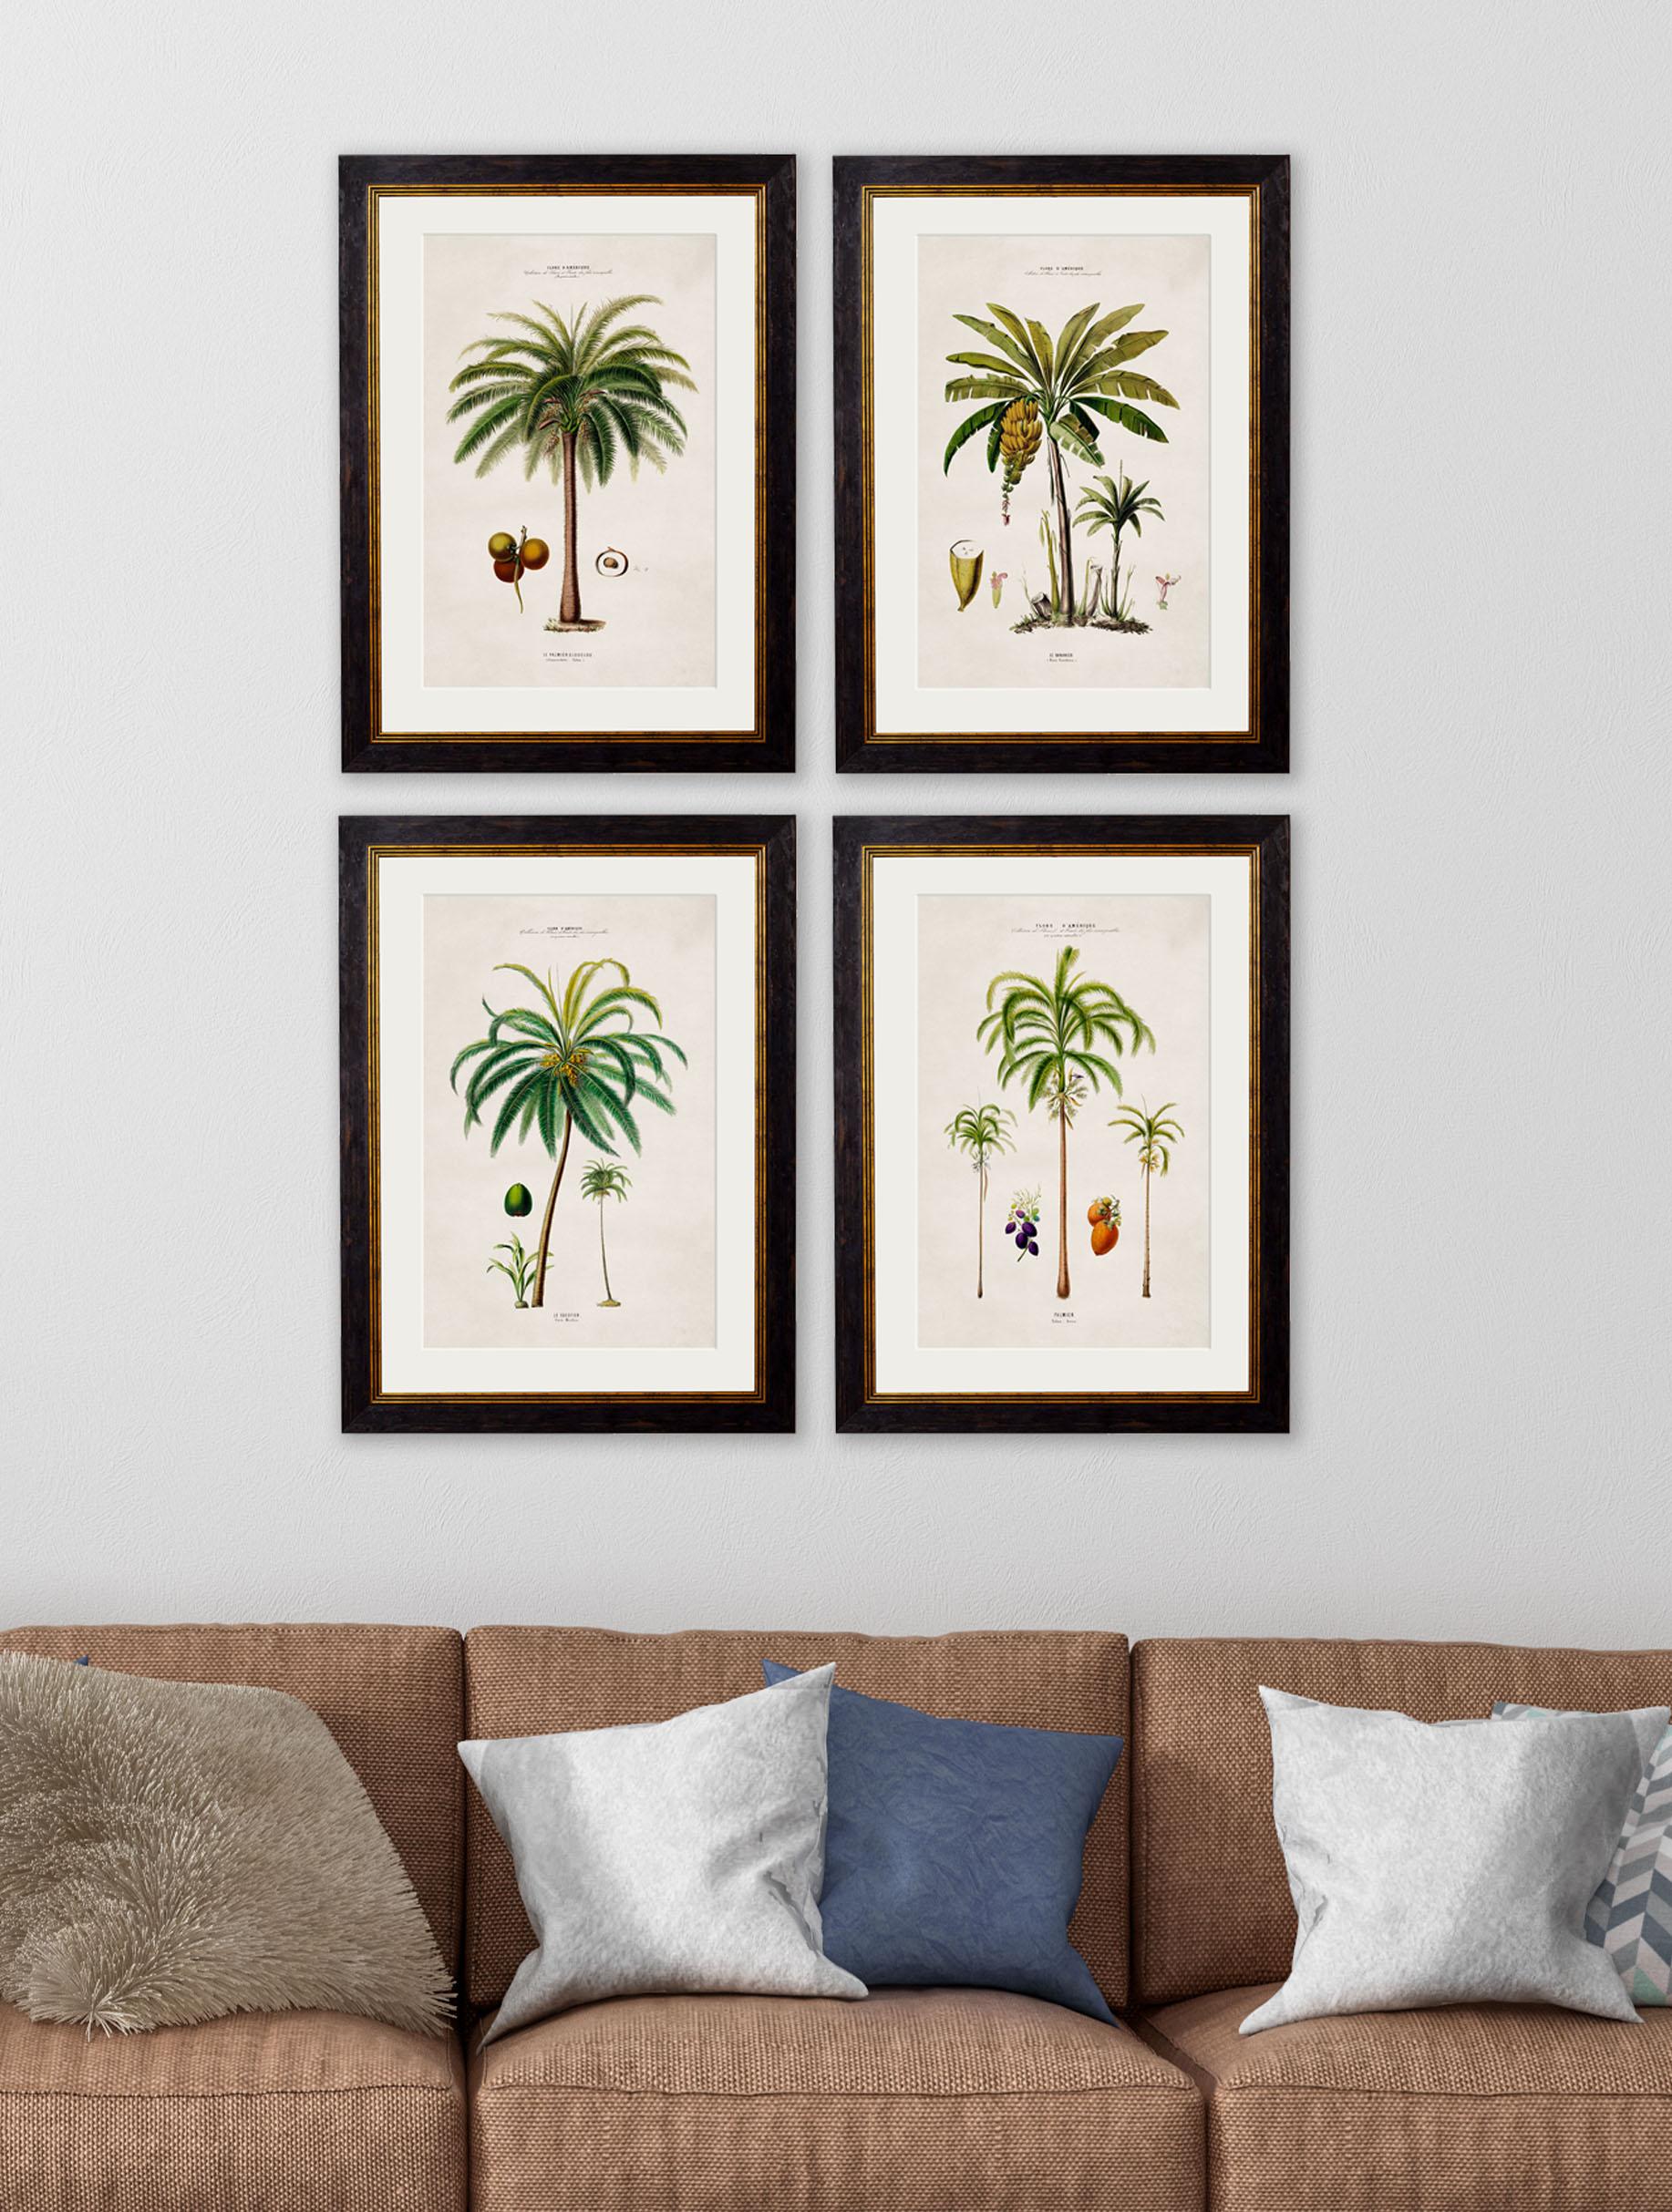 These are a set of FOUR digitally remastered prints of South American Palm Trees, hand coloured and framed, originally from French drawings,  Circa 1843.

Prints of this style were originally printed in black and white and then hand painted over the